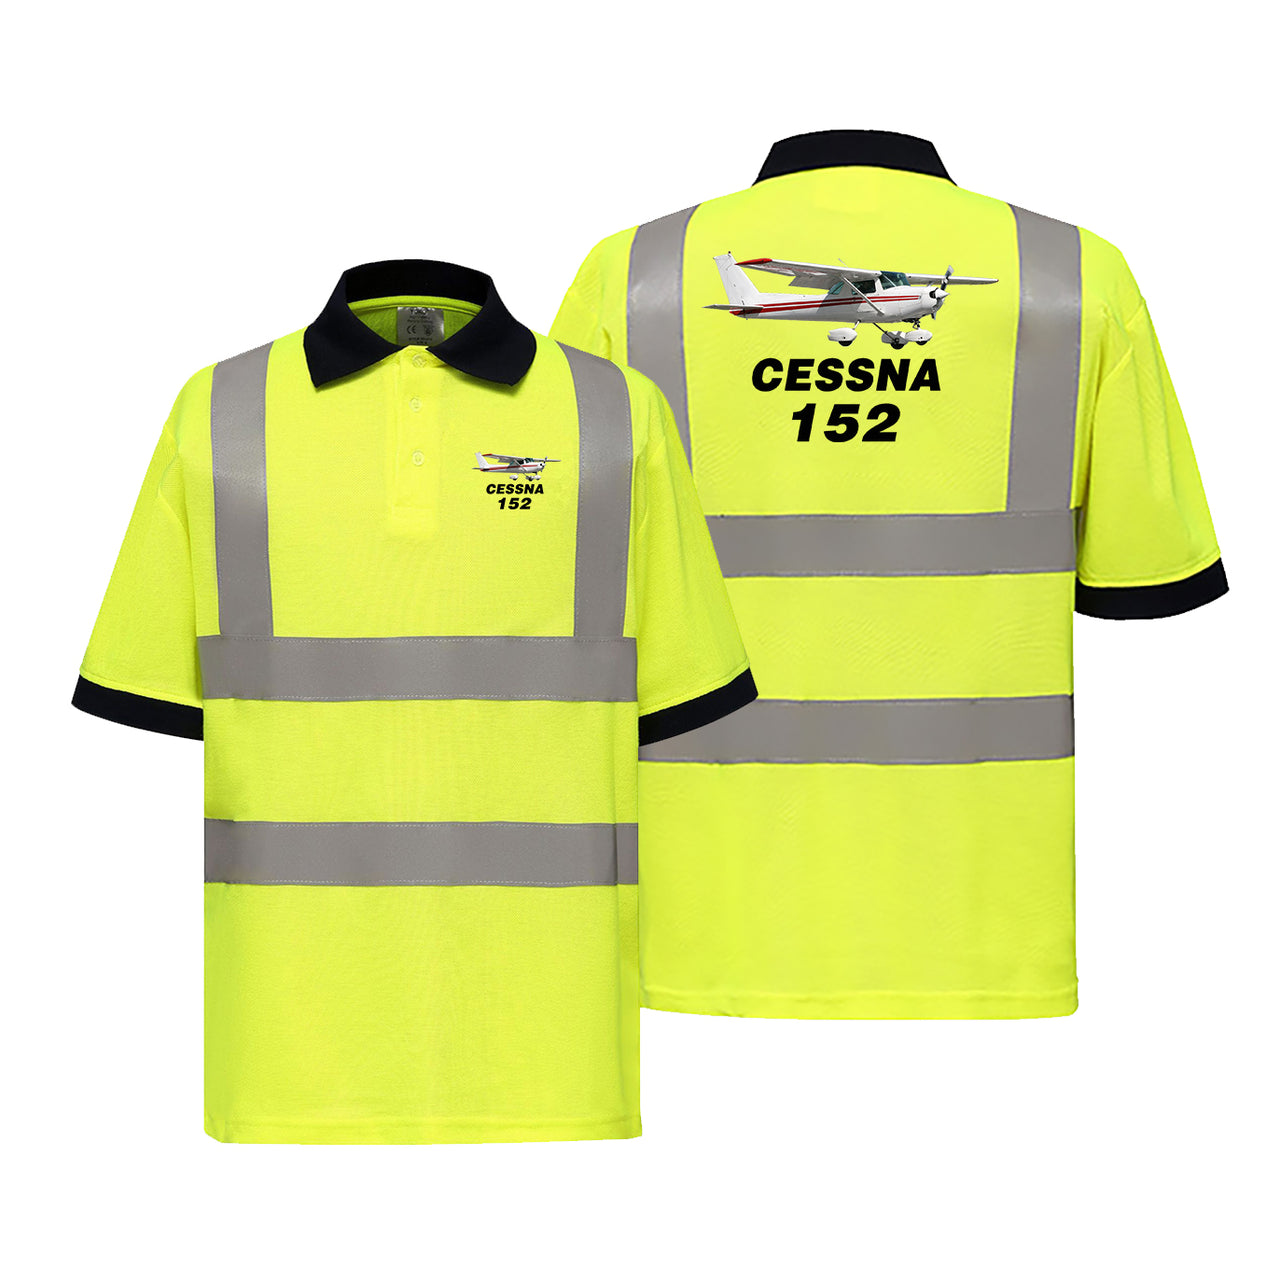 The Cessna 152 Designed Reflective Polo T-Shirts